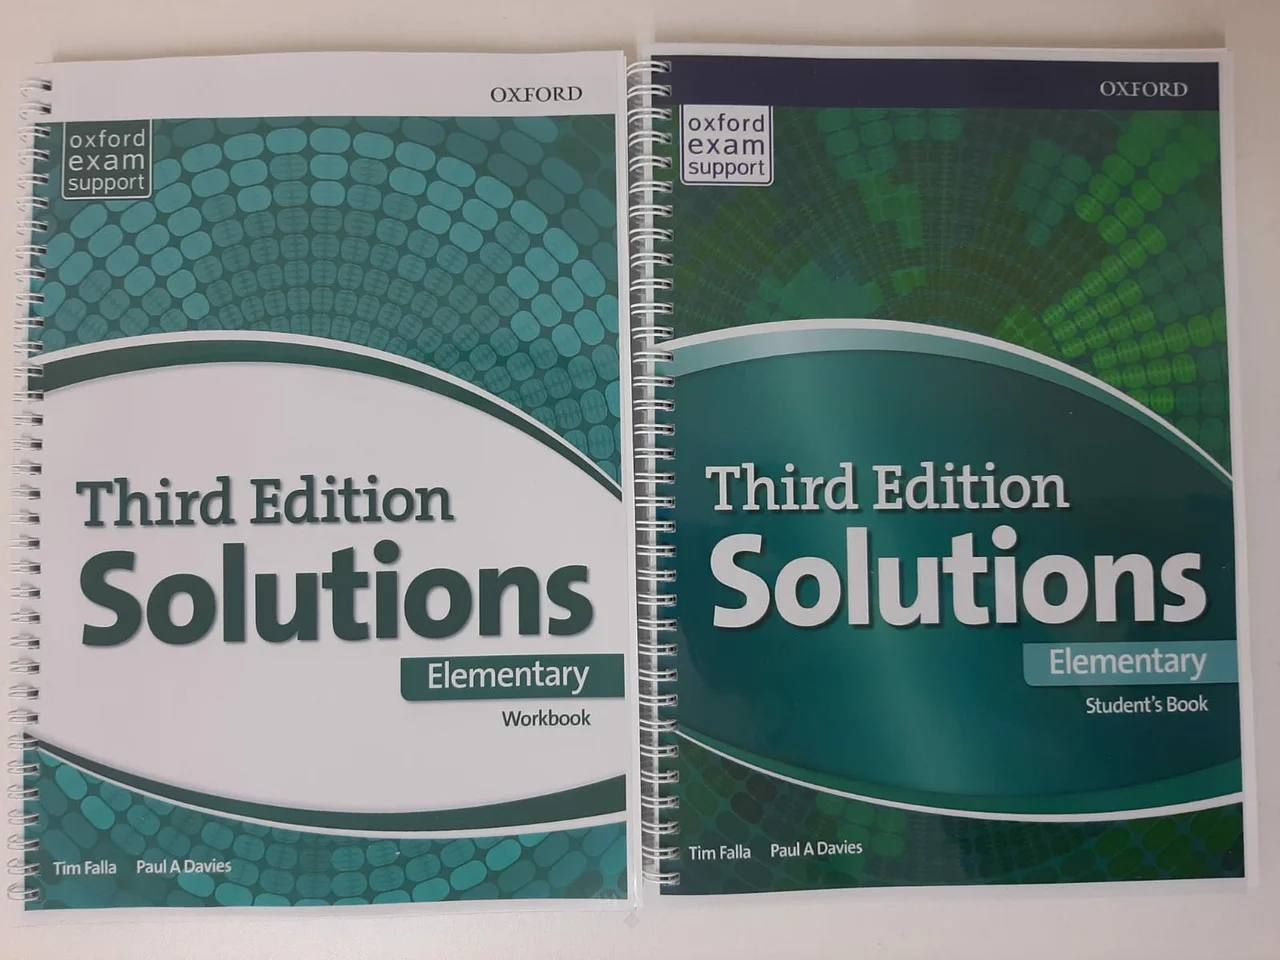 Solutions Elementary 3rd Edition. Solutions third Edition Elementary Tests. Solutions Elementary Green 3rd Edition exsom 3. Solutions Elementary 3rd Edition Tests 3.